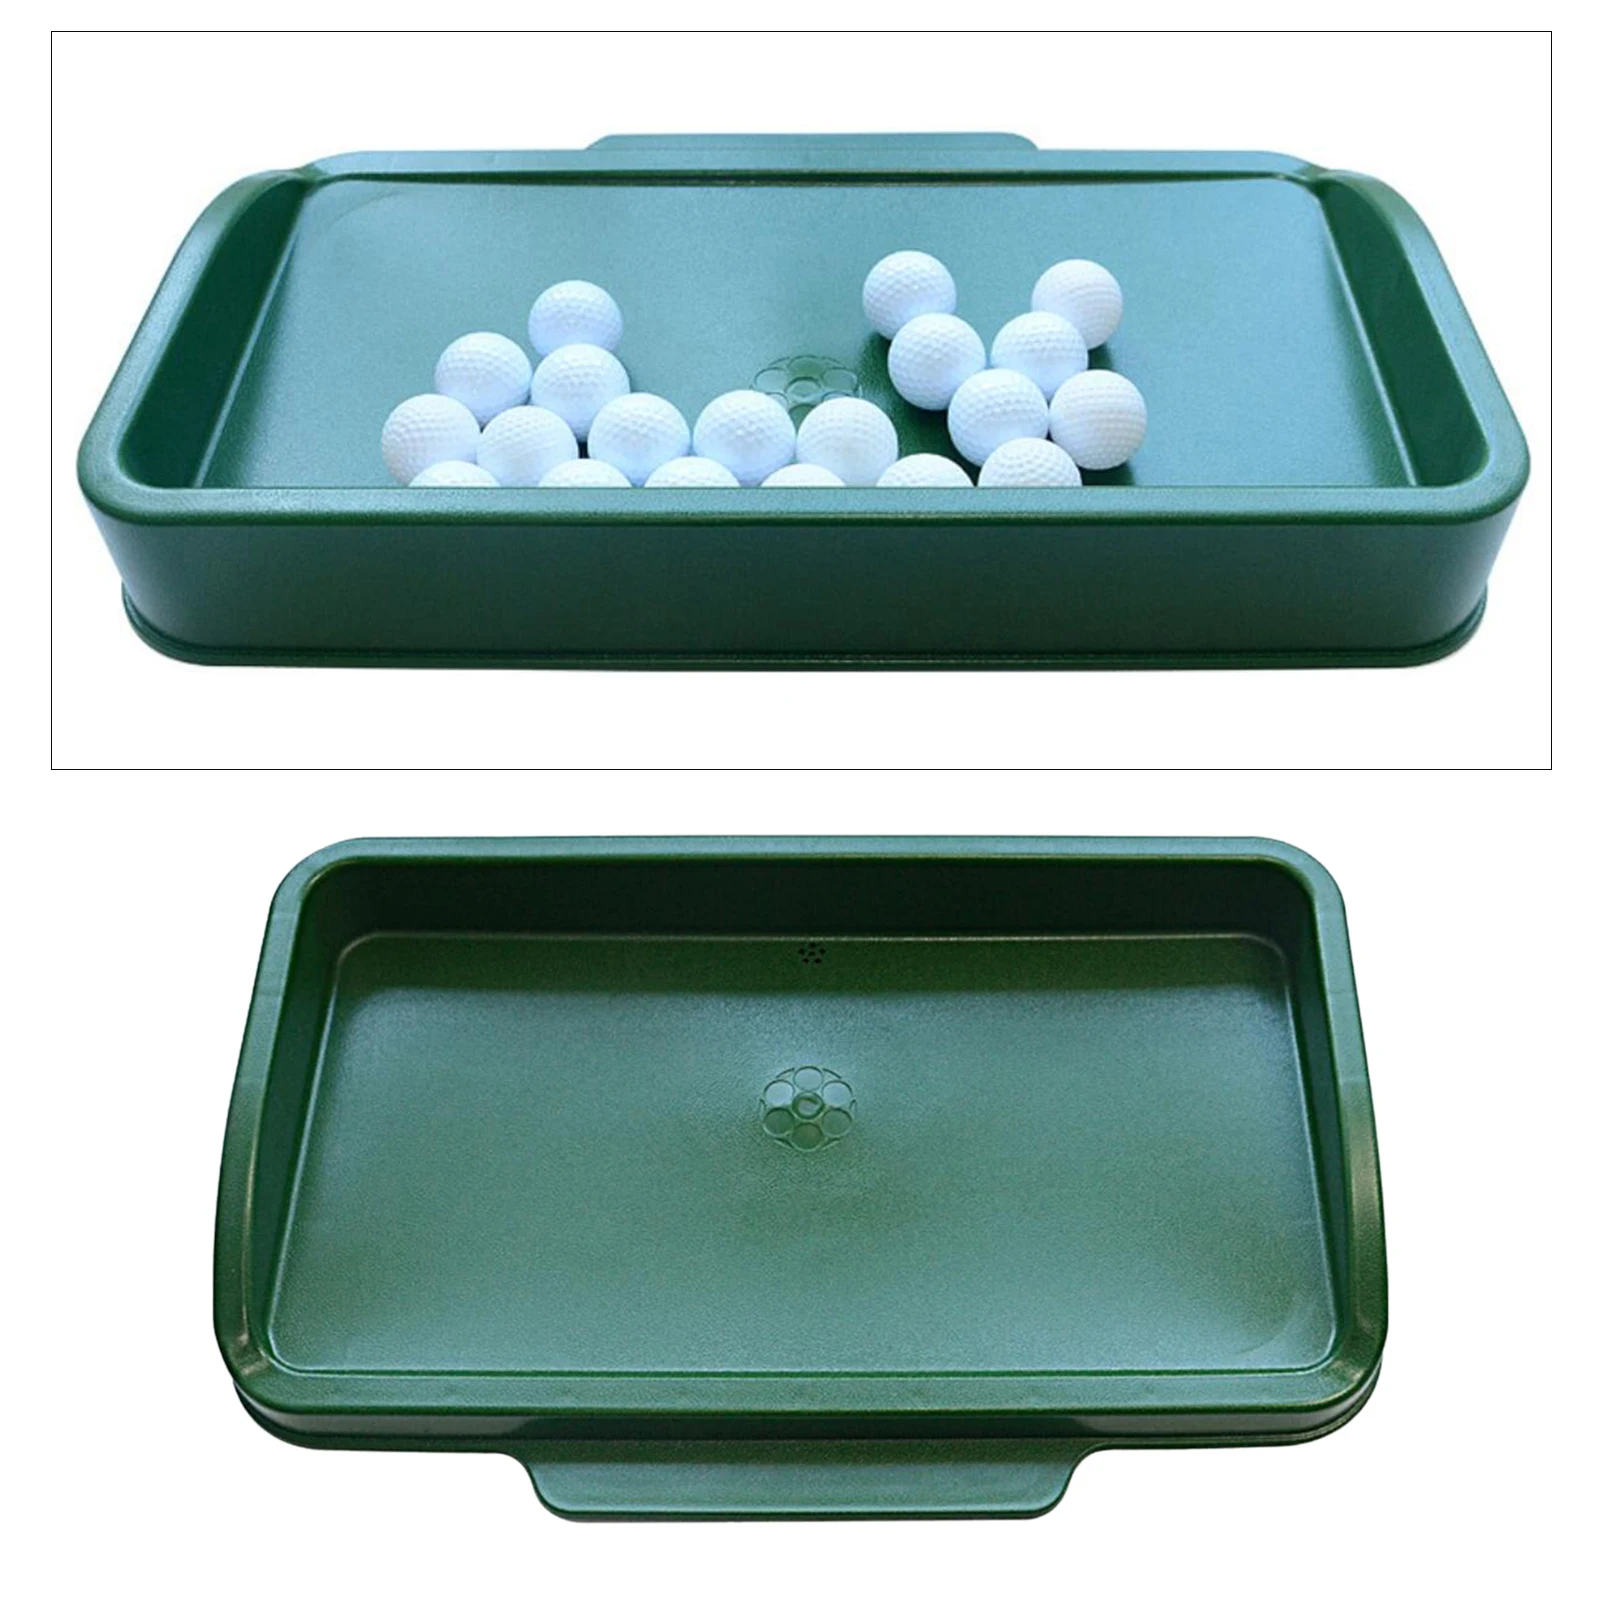 Large Golf Ball Tray Durable Silicon Driving Range Golf Tray Ball Baskets Box Golf Accessories Golf Ball Container Gifts for Men